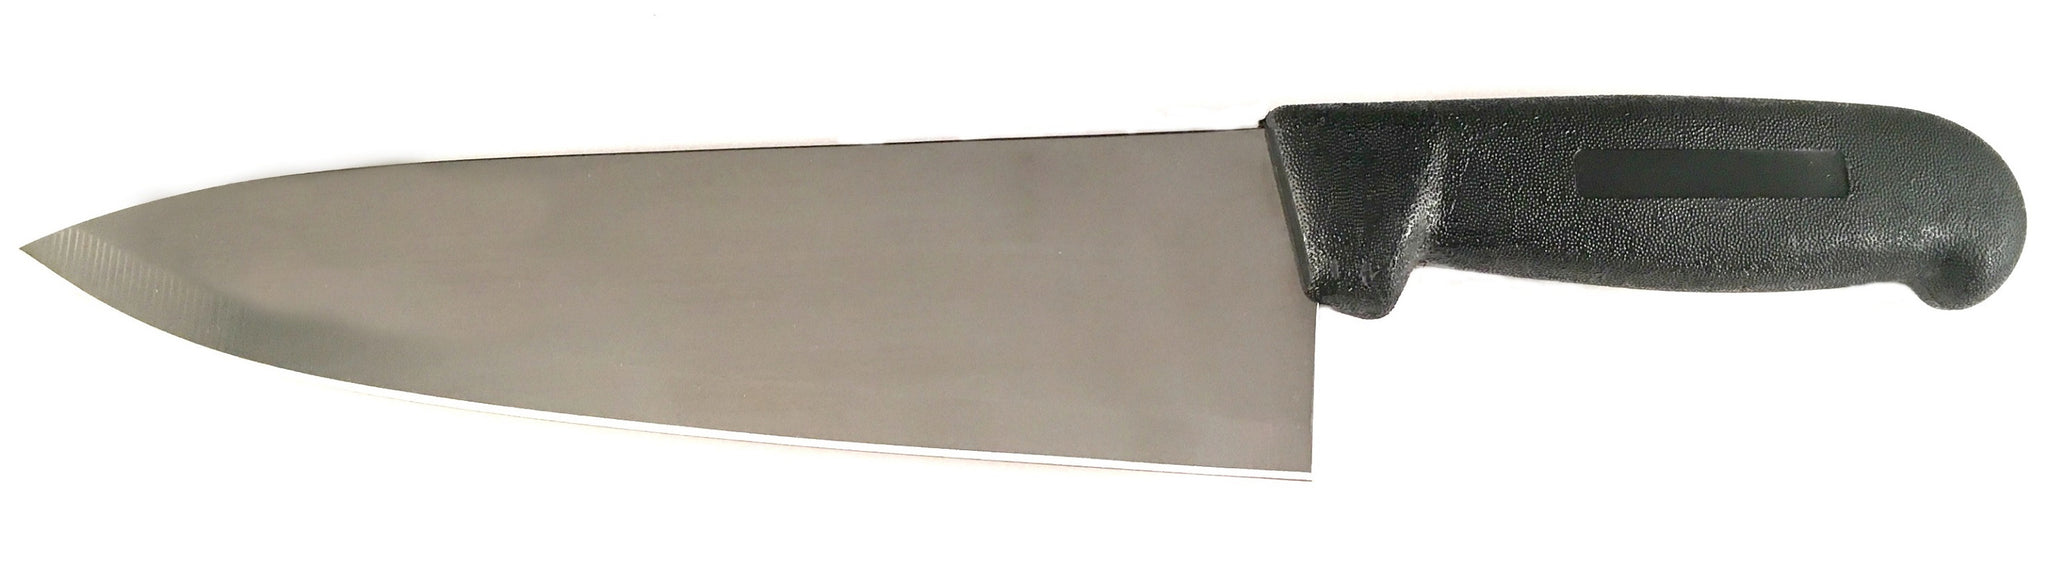 Professional Kitchen Knives: Chef Knives & Commercial Kitchen Cutlery